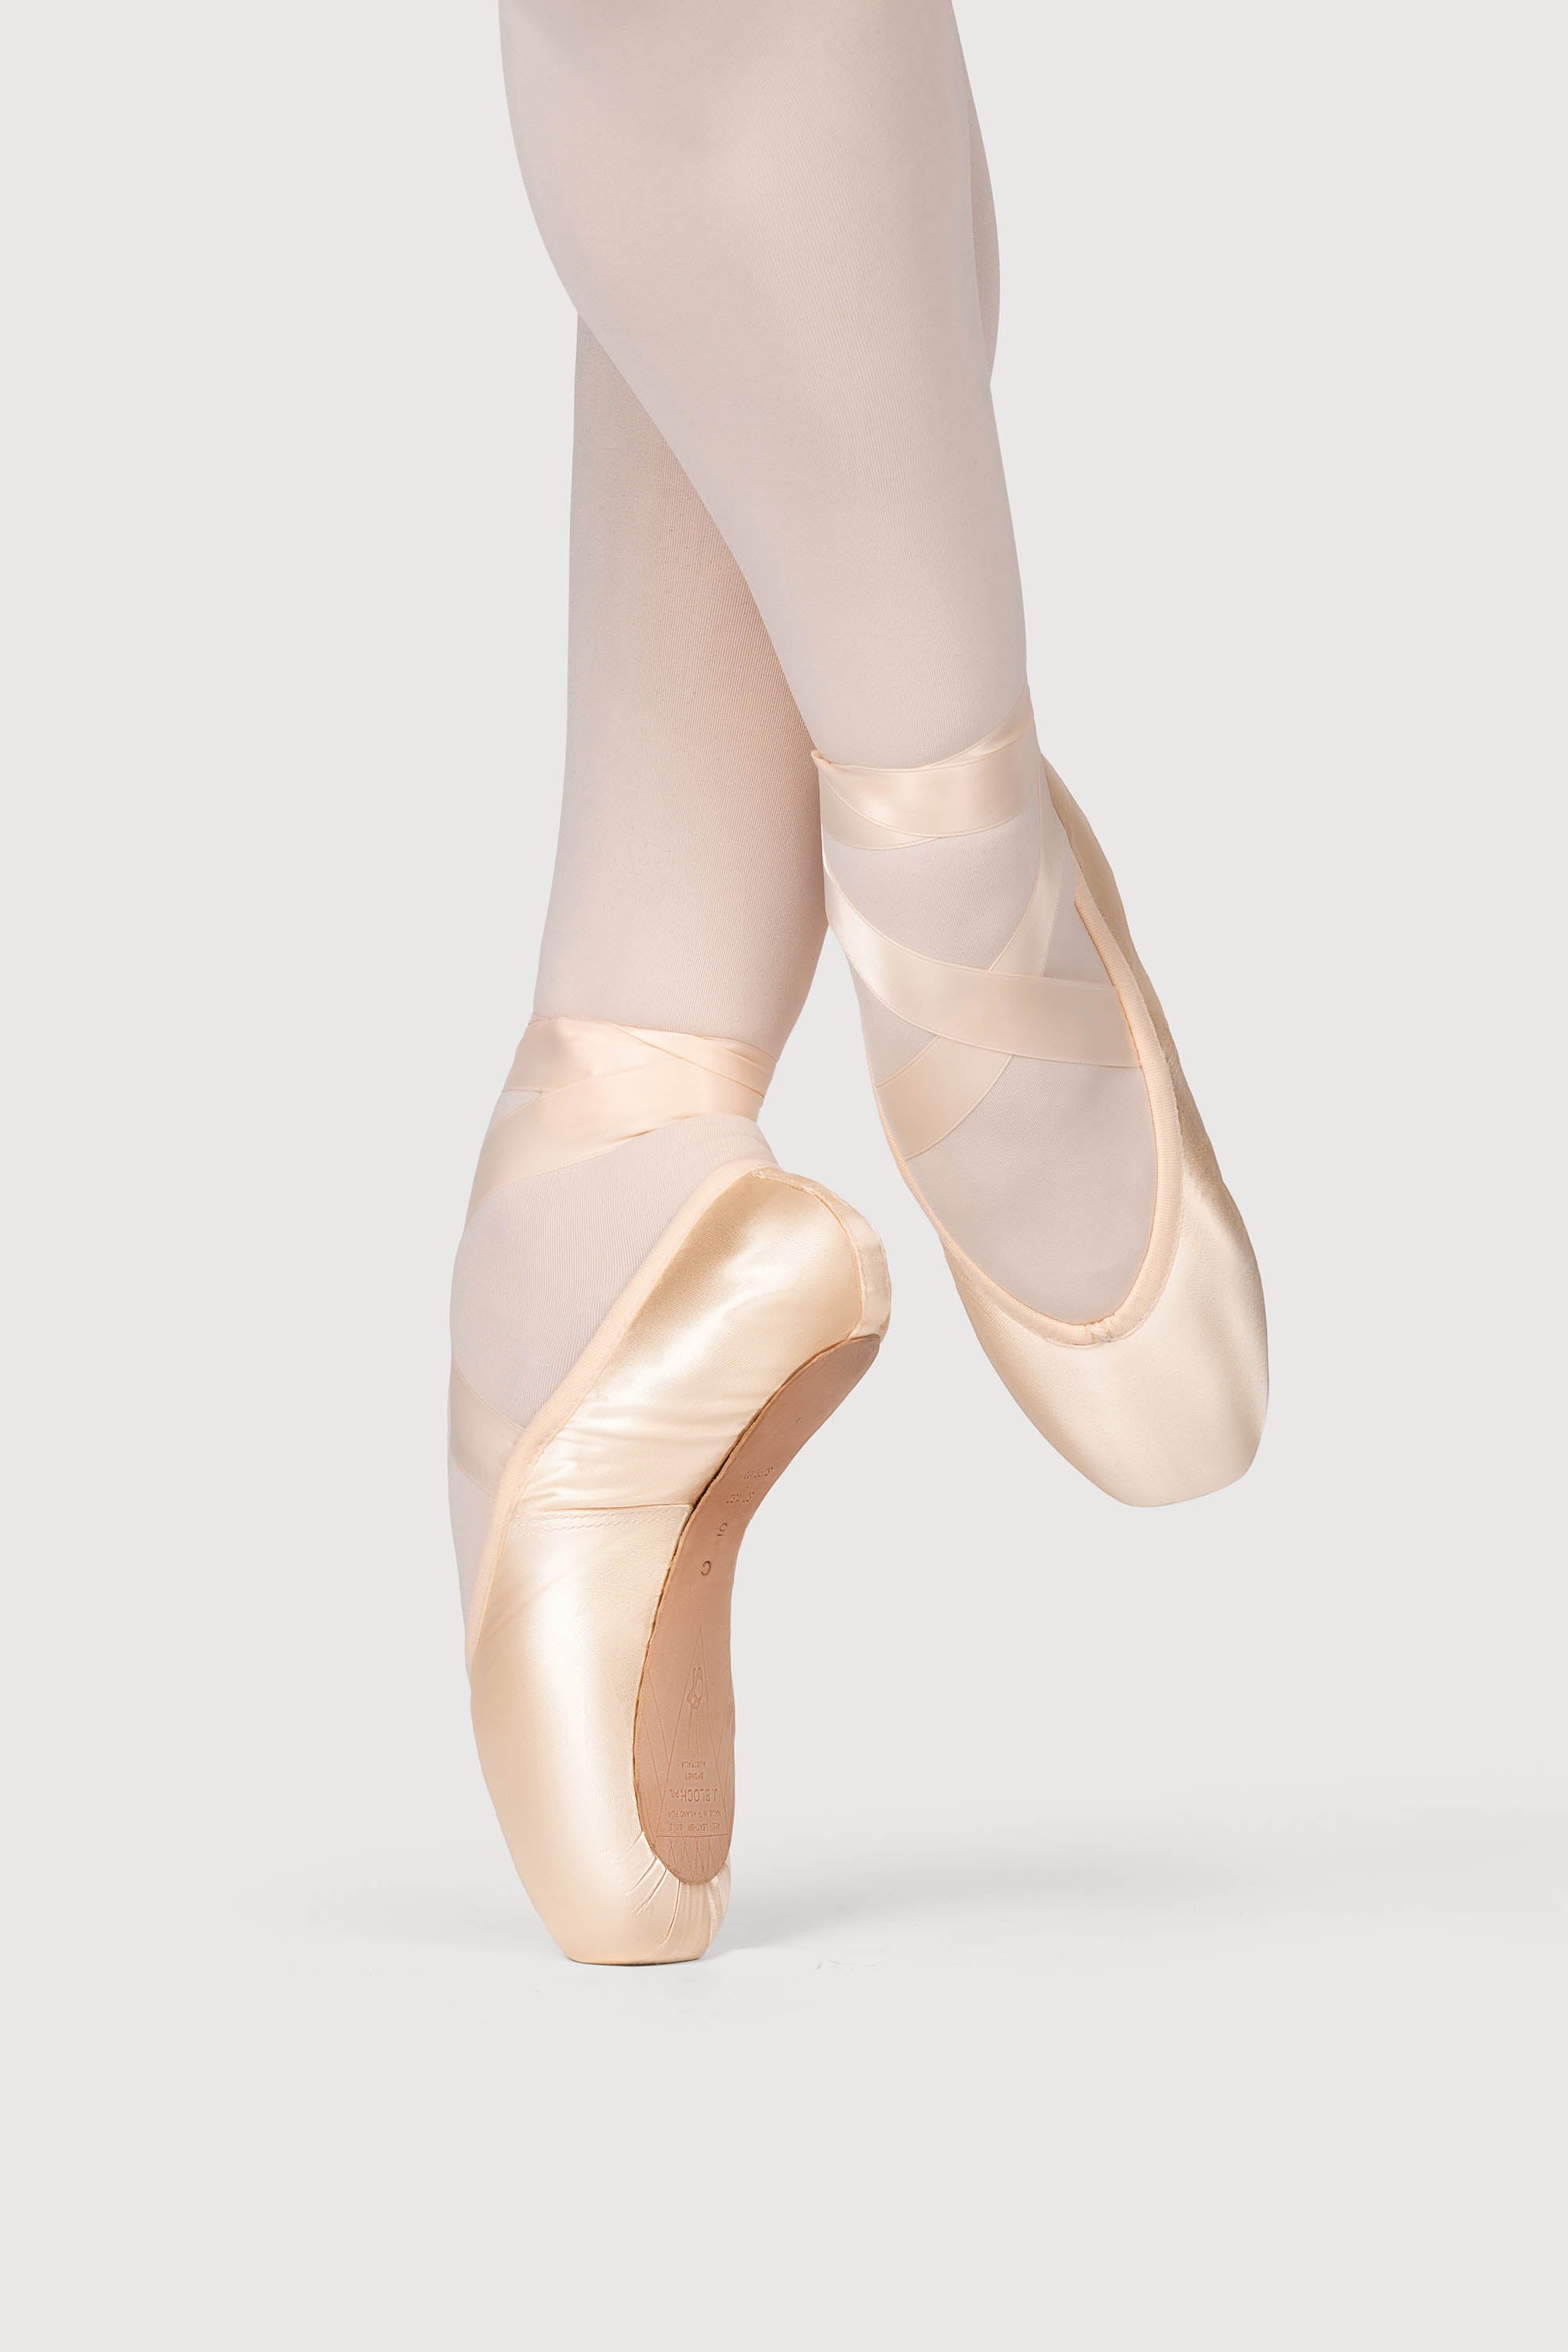 Your First Pointe Shoe Fitting with Bloch 